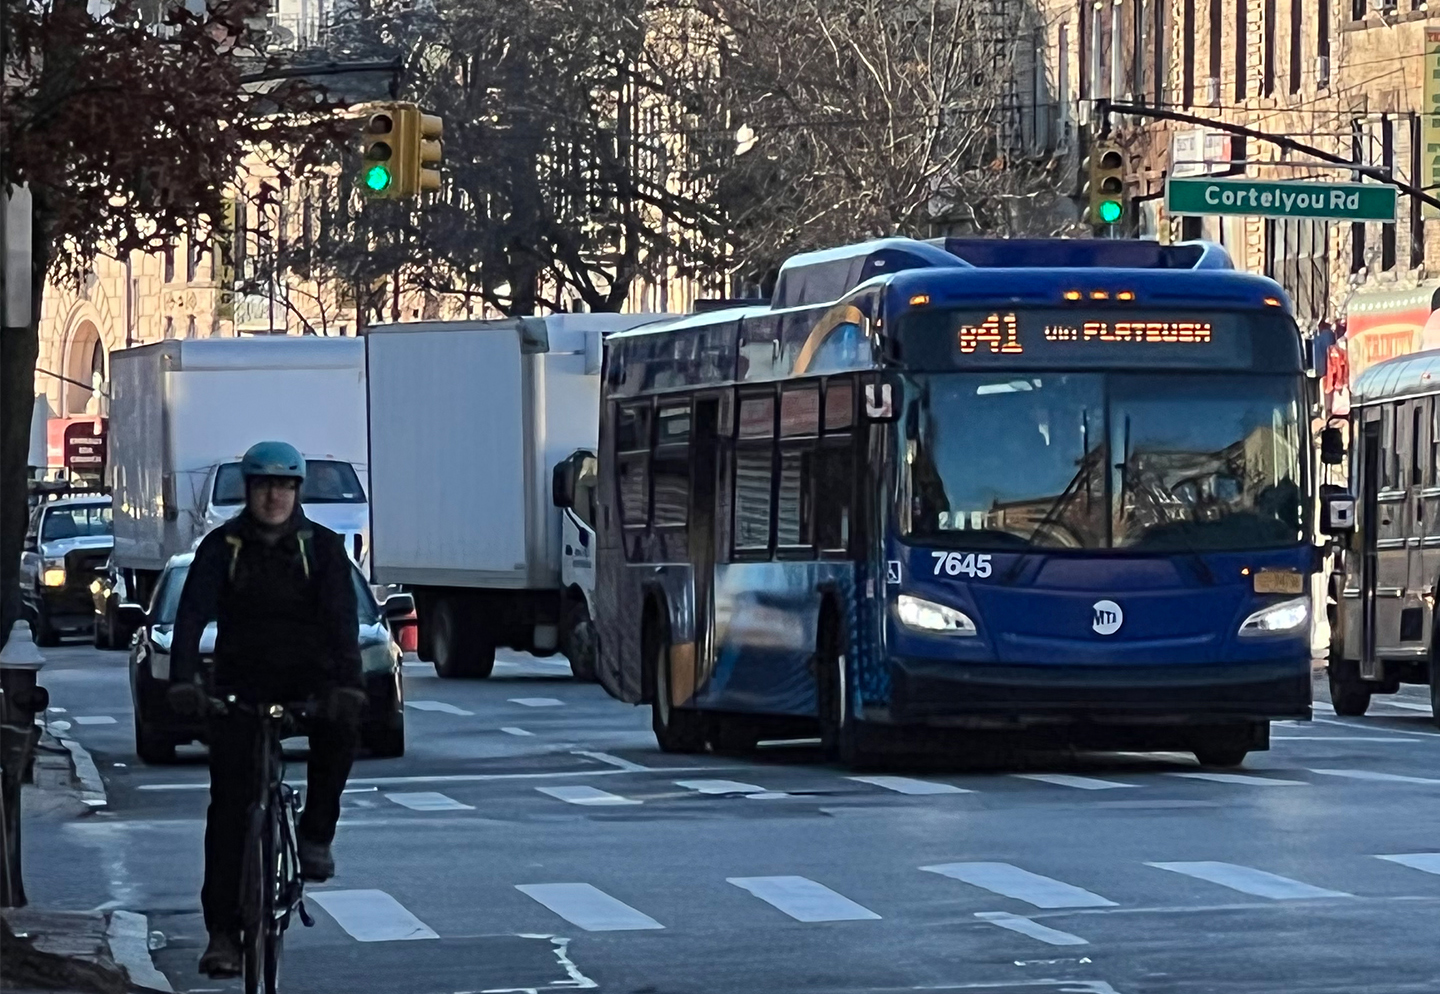 A person riding a bike and a bus in heavy traffic on a street full of cars and trucks.